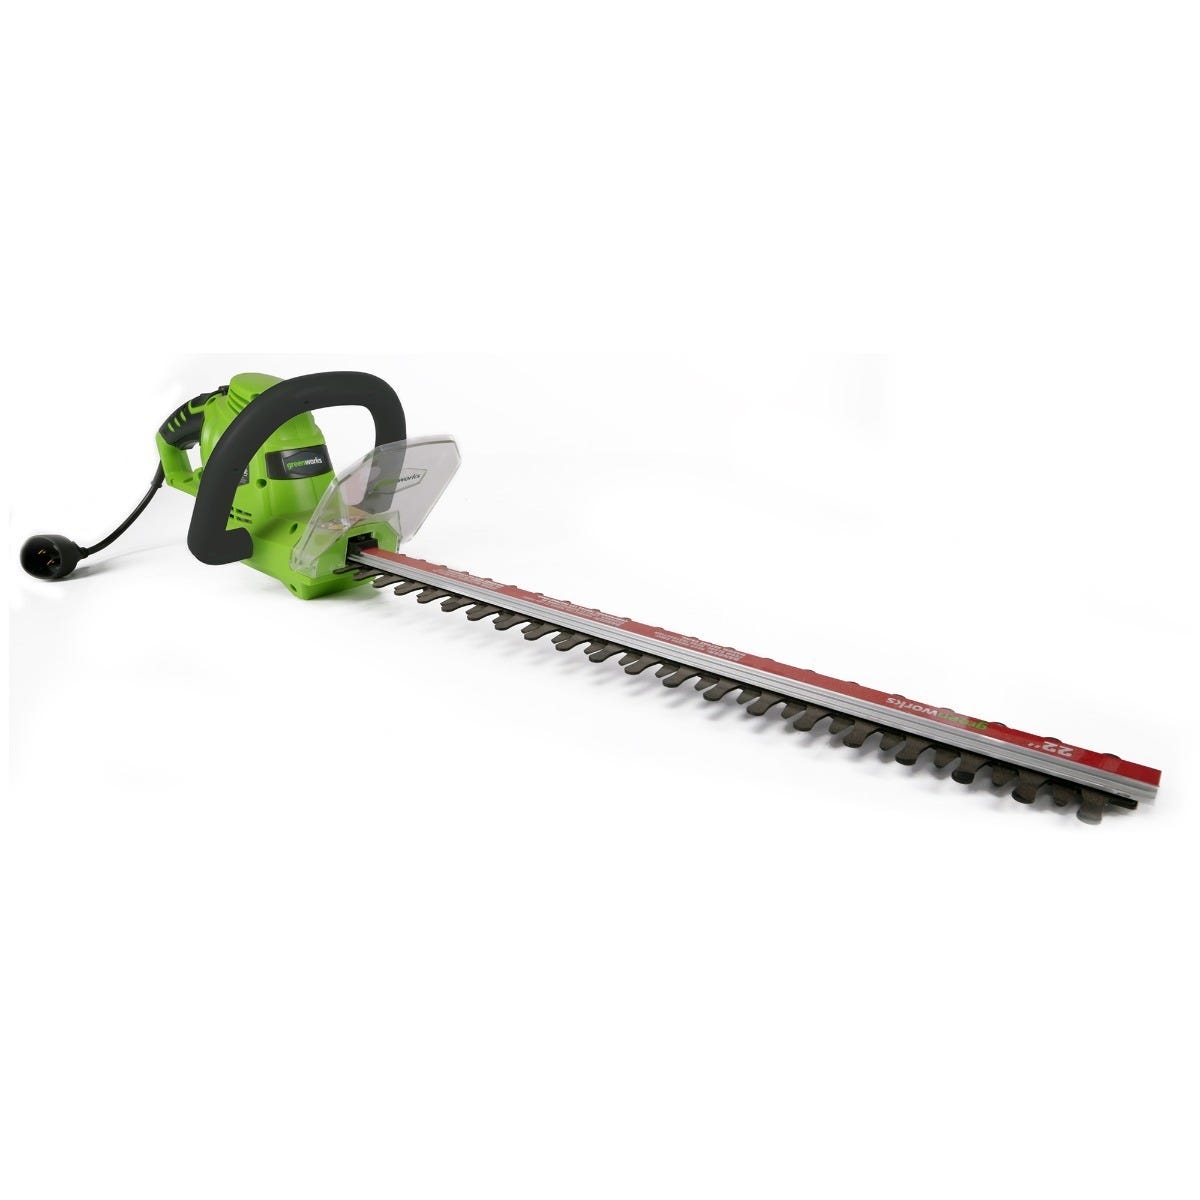 4 Amp 22" Corded Hedge Trimmer